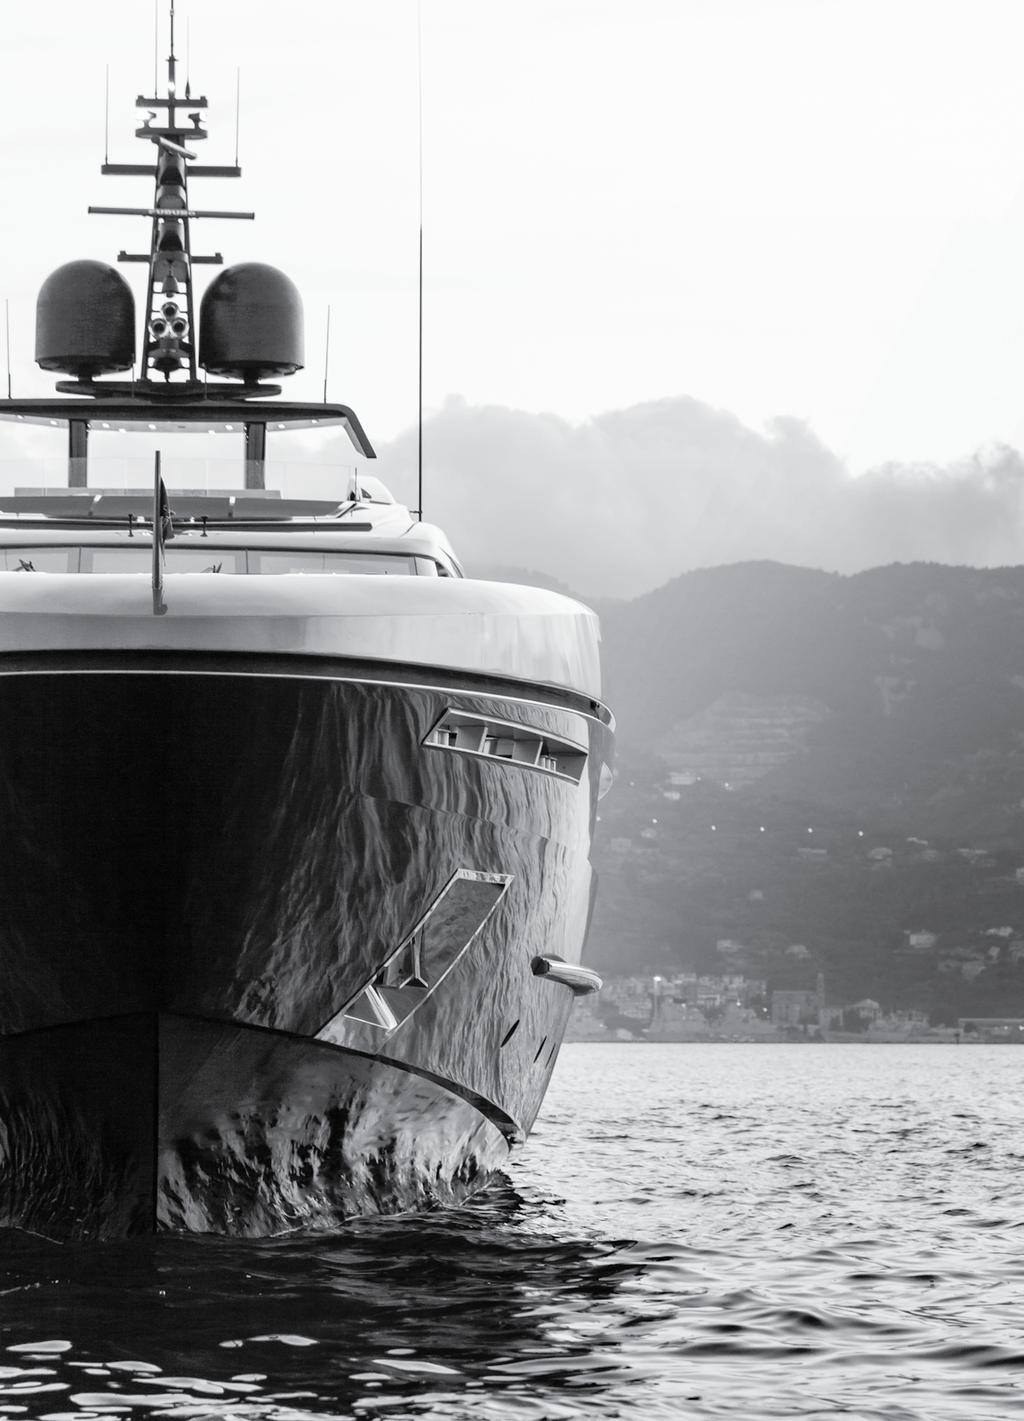 The magazine issued with the support of digital media SuperYacht.